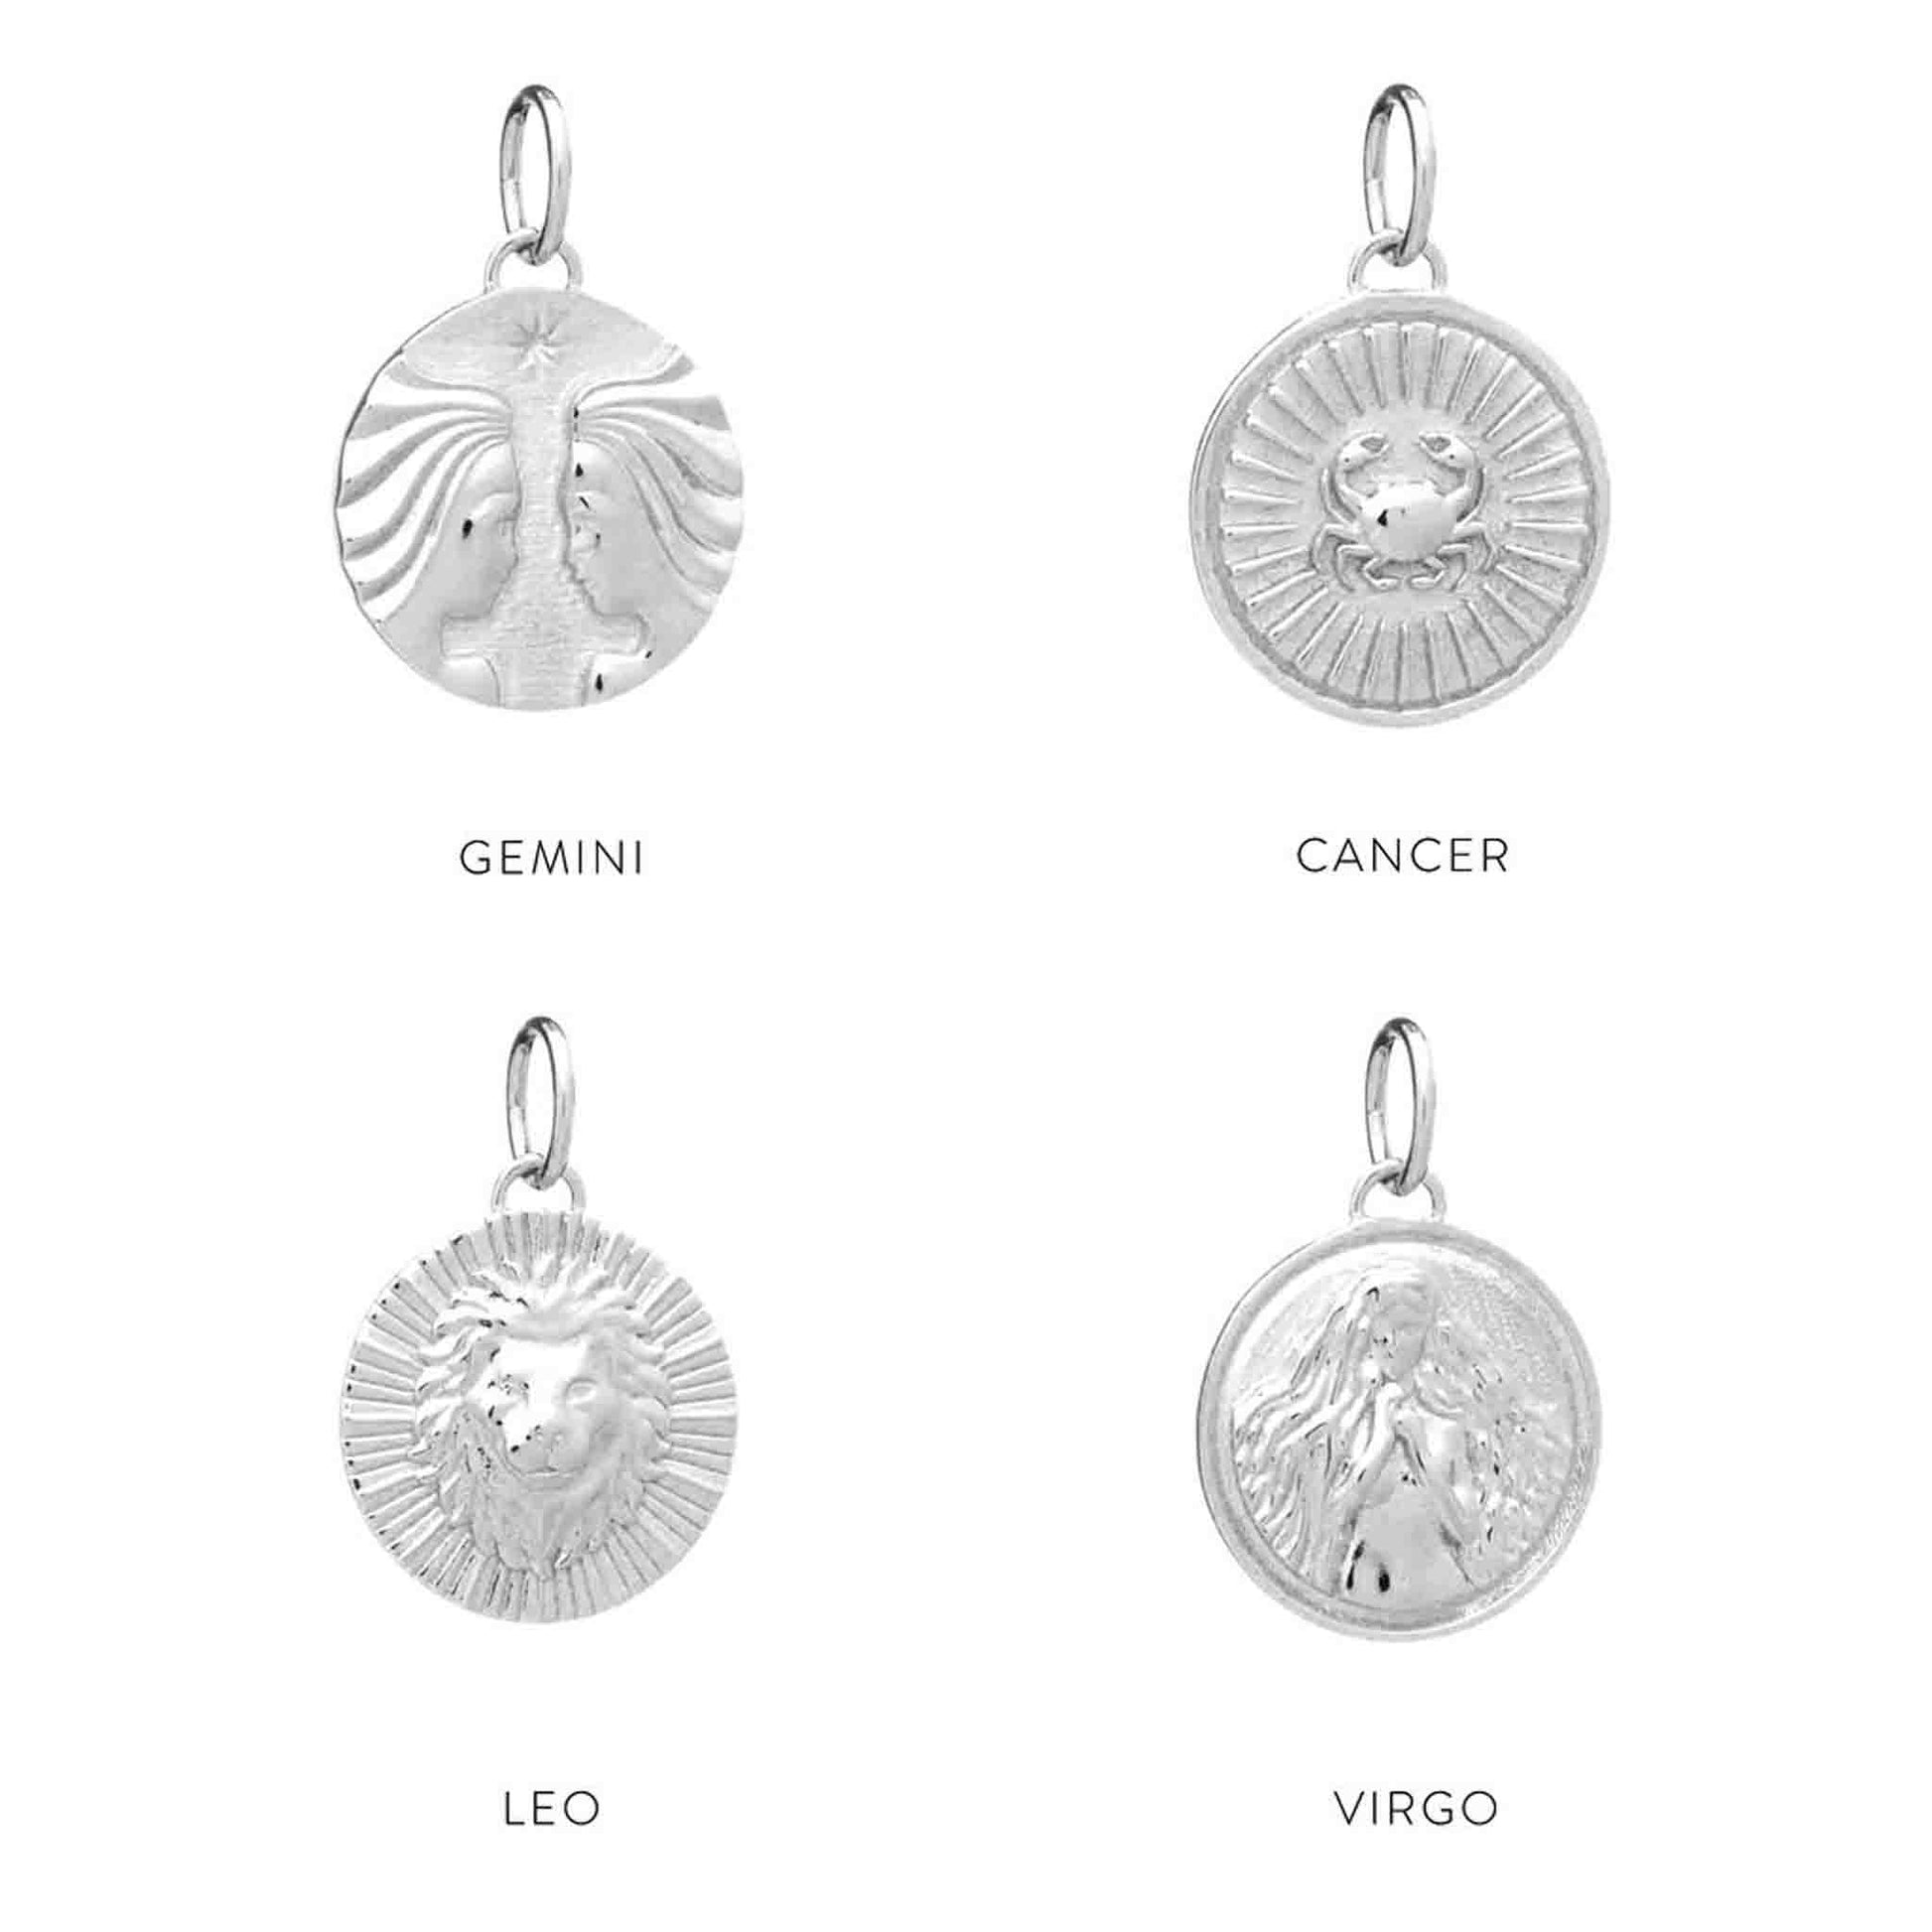 Zodiac Art Coin Necklaces by Rachel Jackson can be a beautiful addition to any collection. These unique pieces of zodiac art capture the essence of each sign, making them the perfect statement accessory. Whether you enjoy collecting coins or are